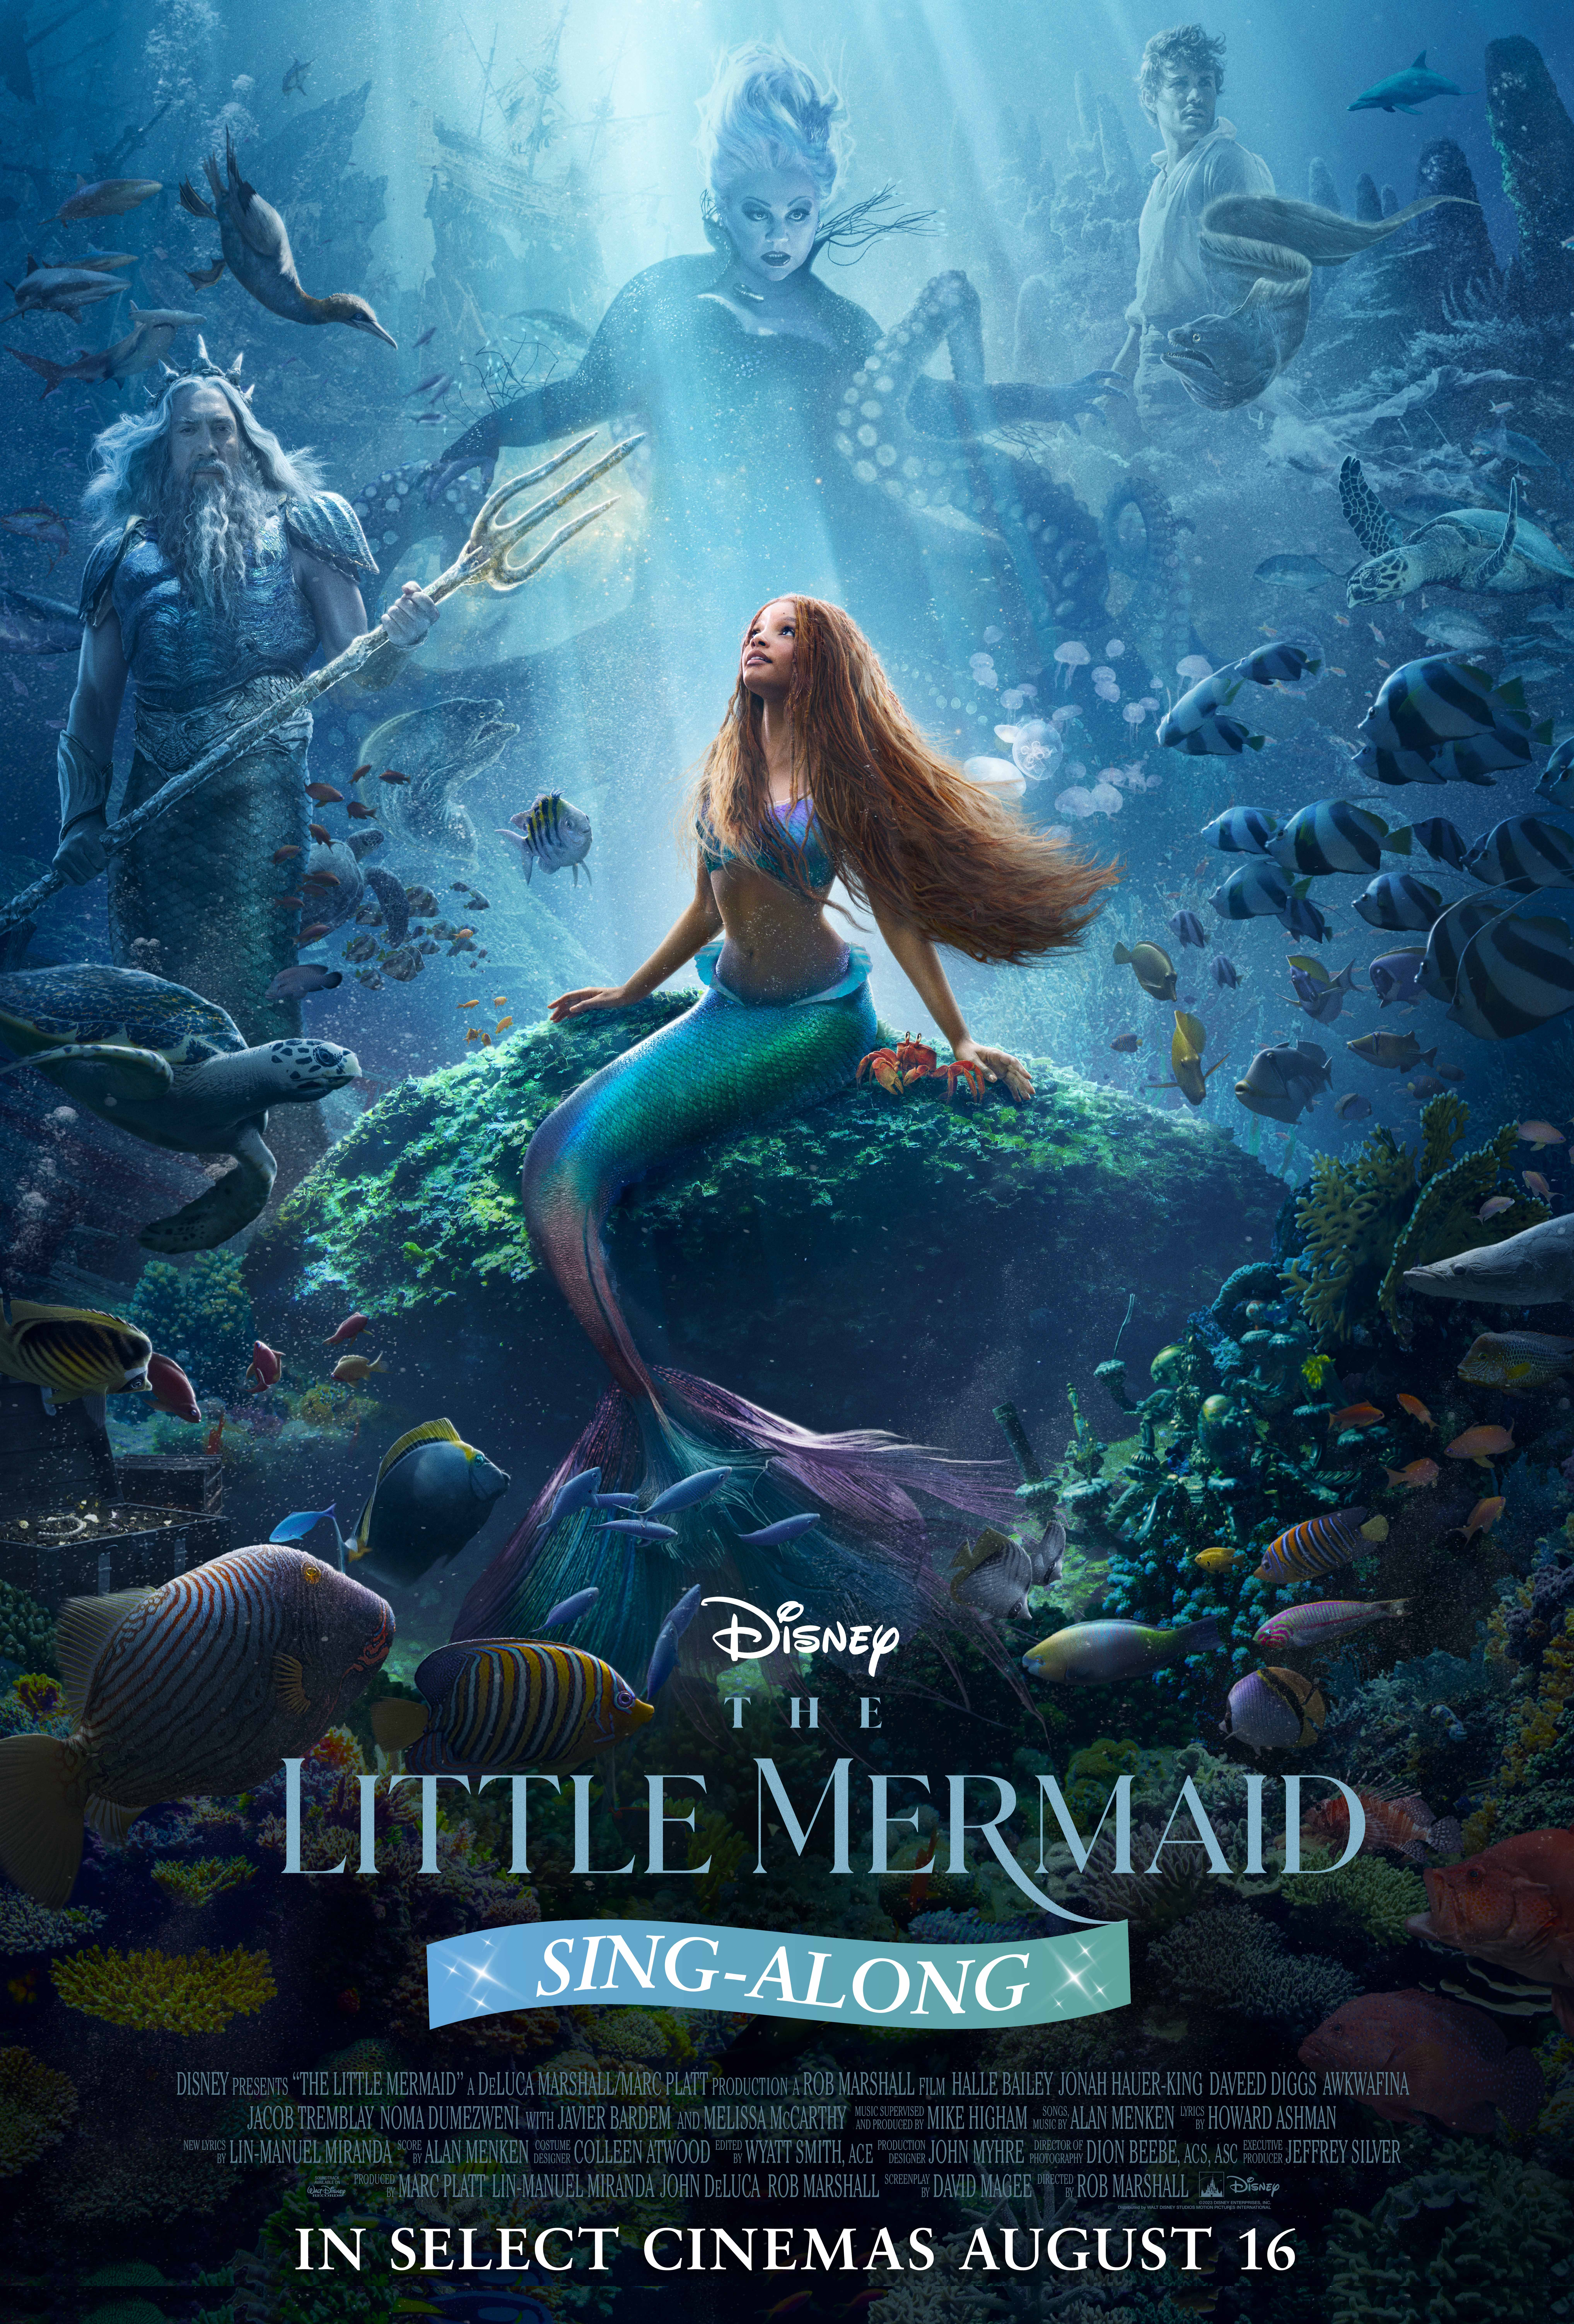 Disney’s “The Little Mermaid” Returns With Special Sing-Along Version